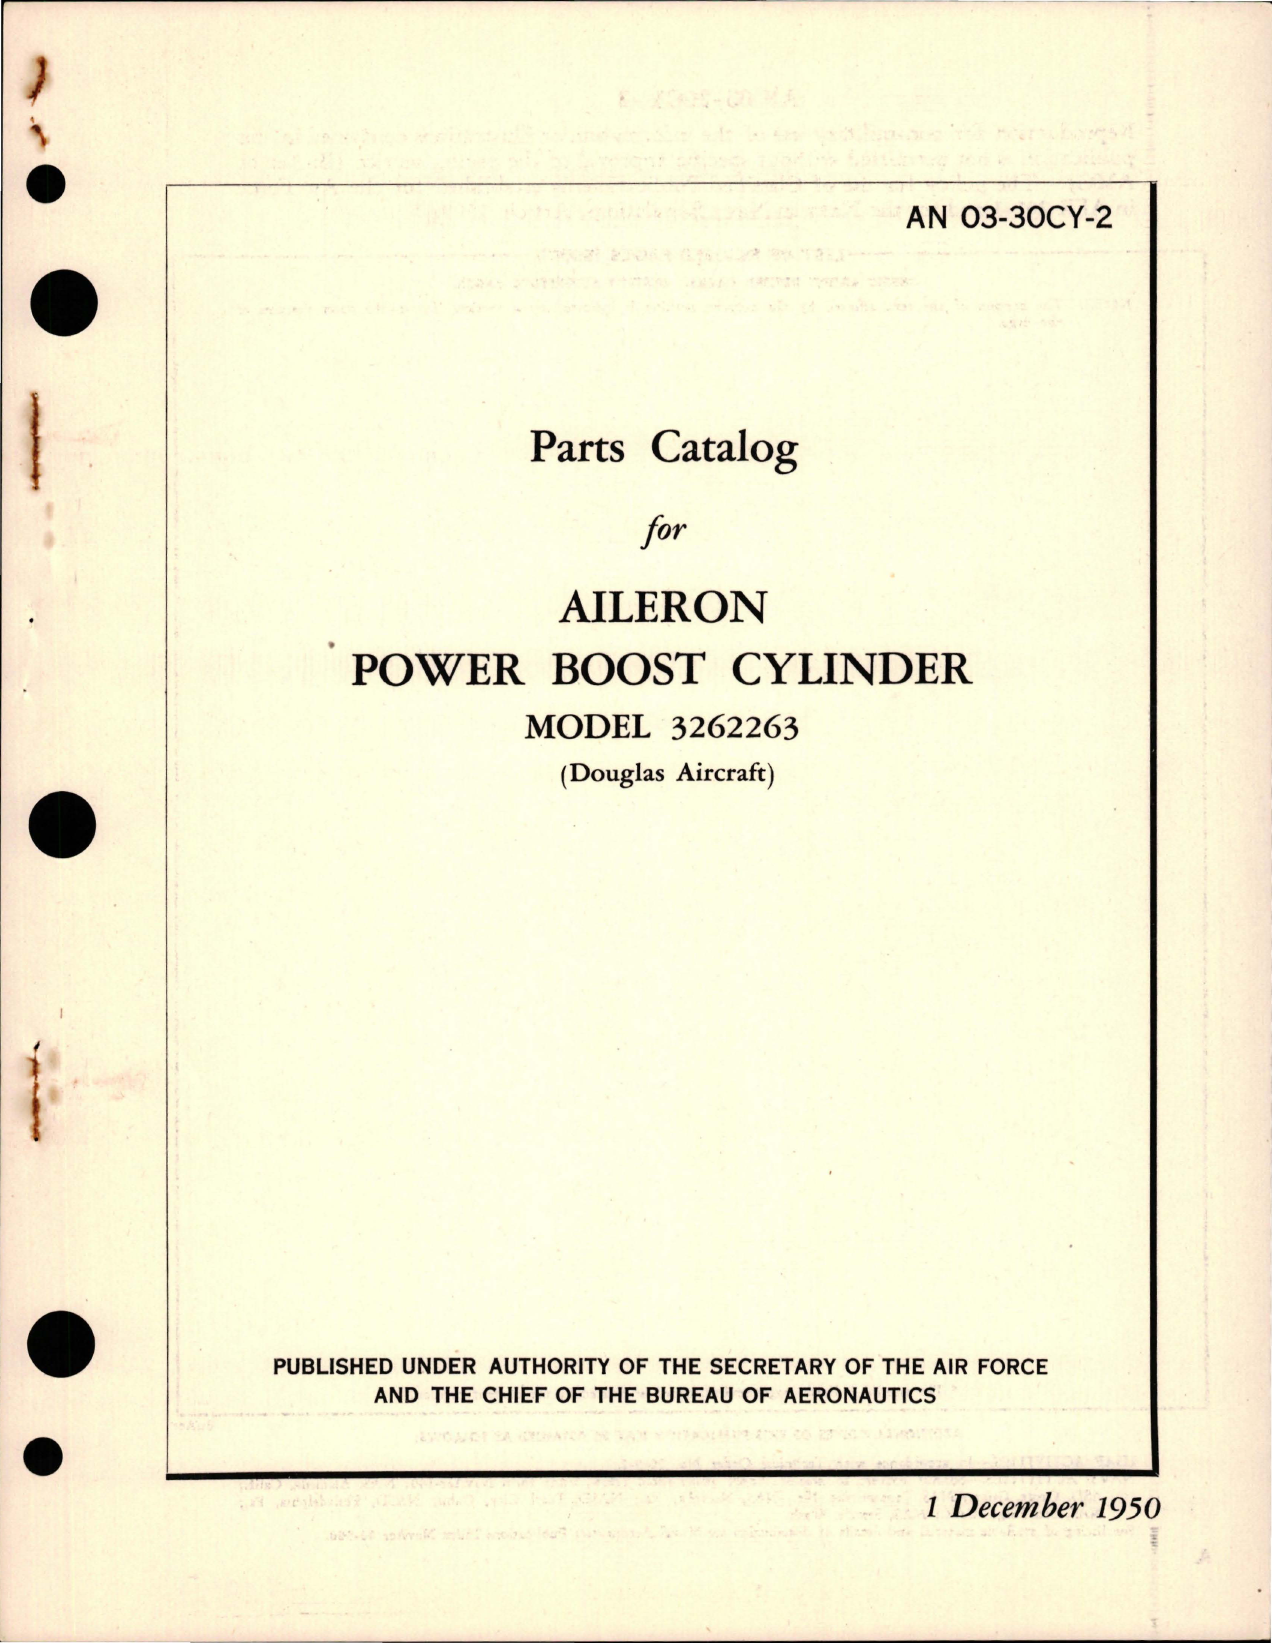 Sample page 1 from AirCorps Library document: Parts Catalog for Aileron Power Boost Cylinder - Model 3262263 